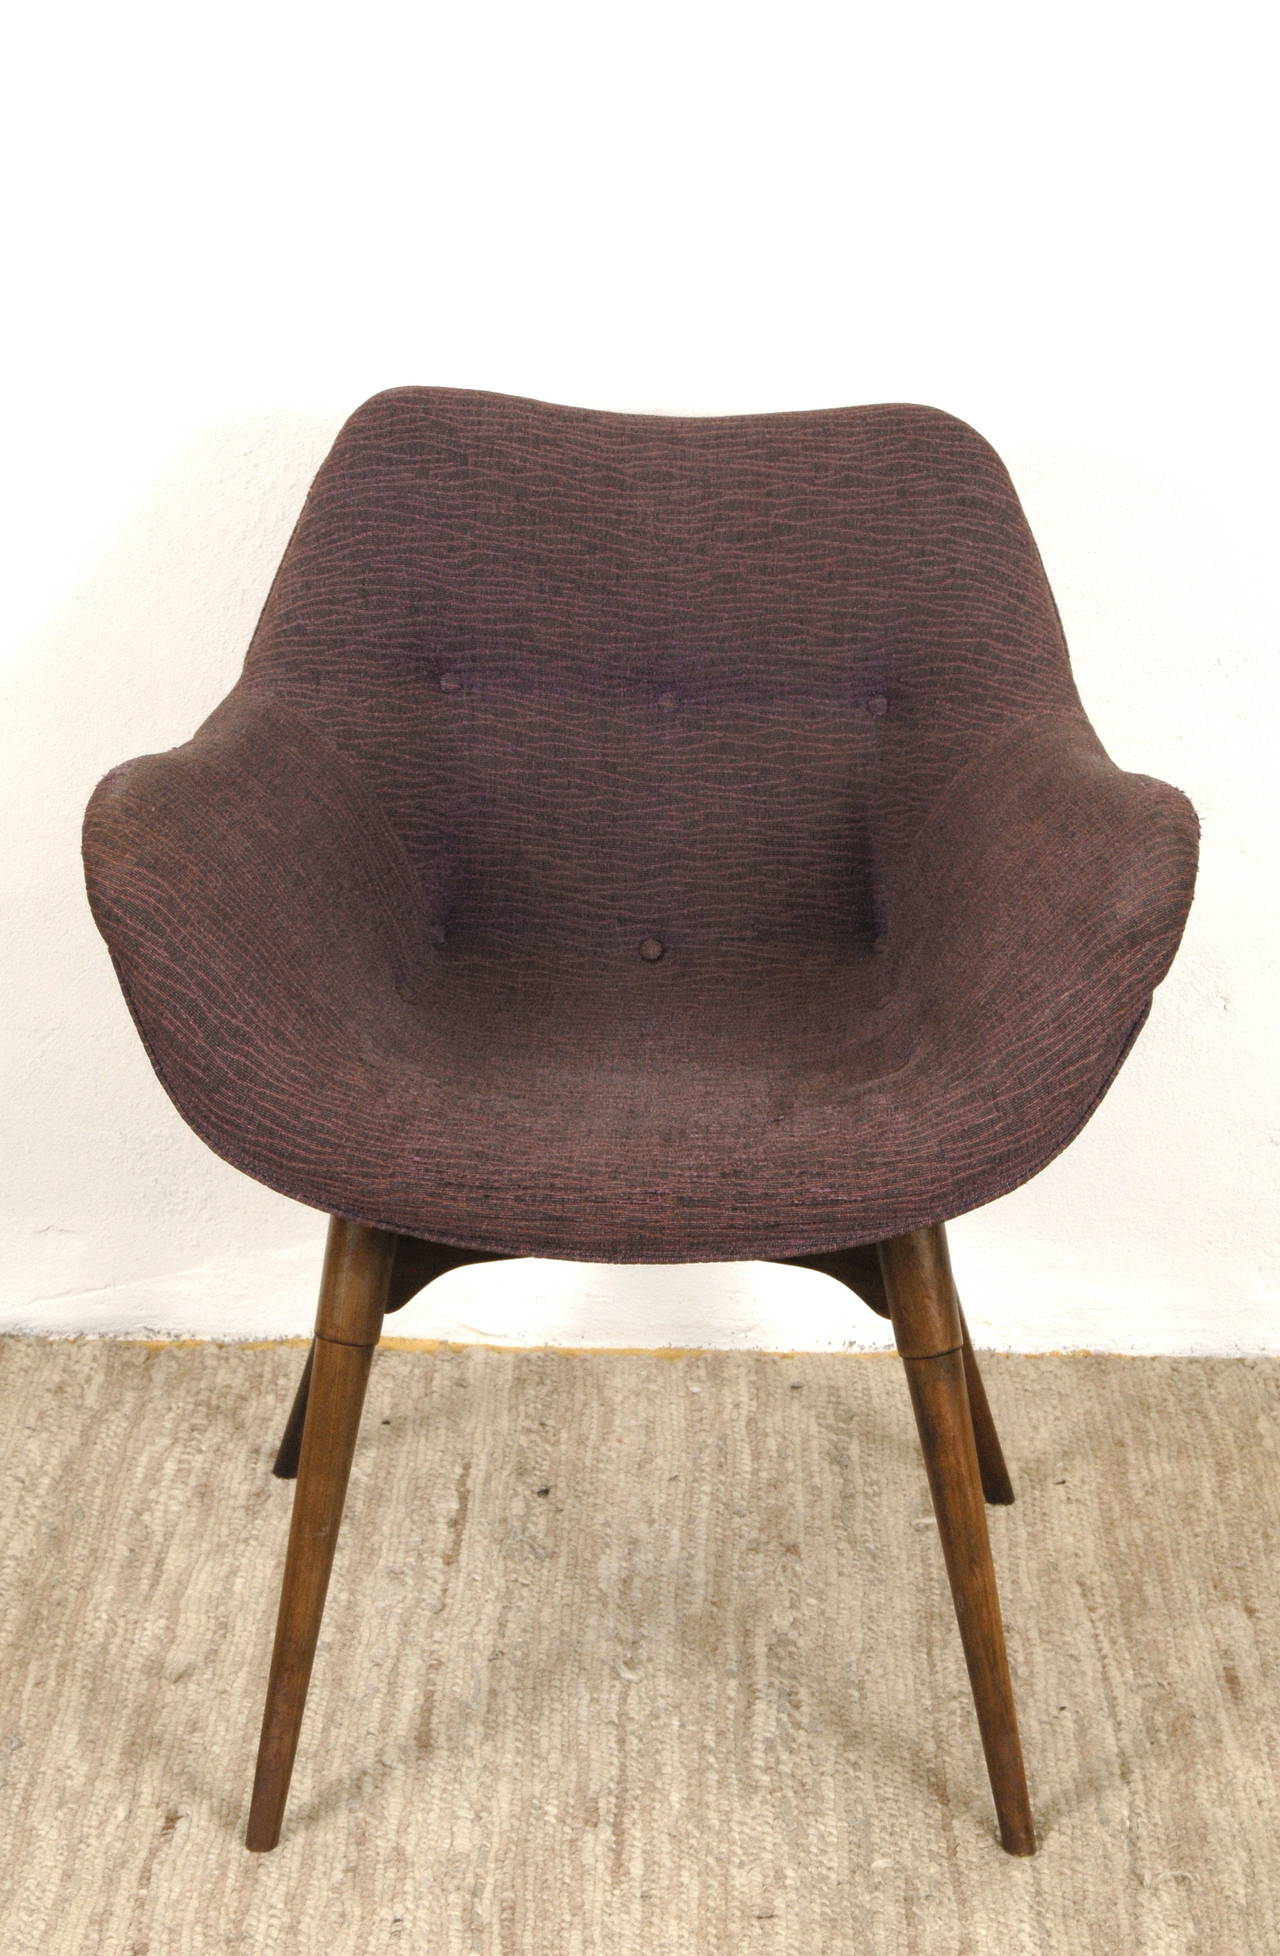 An original Grant Featherston designed A310 contour chair, circa 1953, with its original textured cotton fabric upholstery, made by Emerson Bros, Melbourne.
The fabric is in excellent condition, just with fading on the upper surfaces. There are